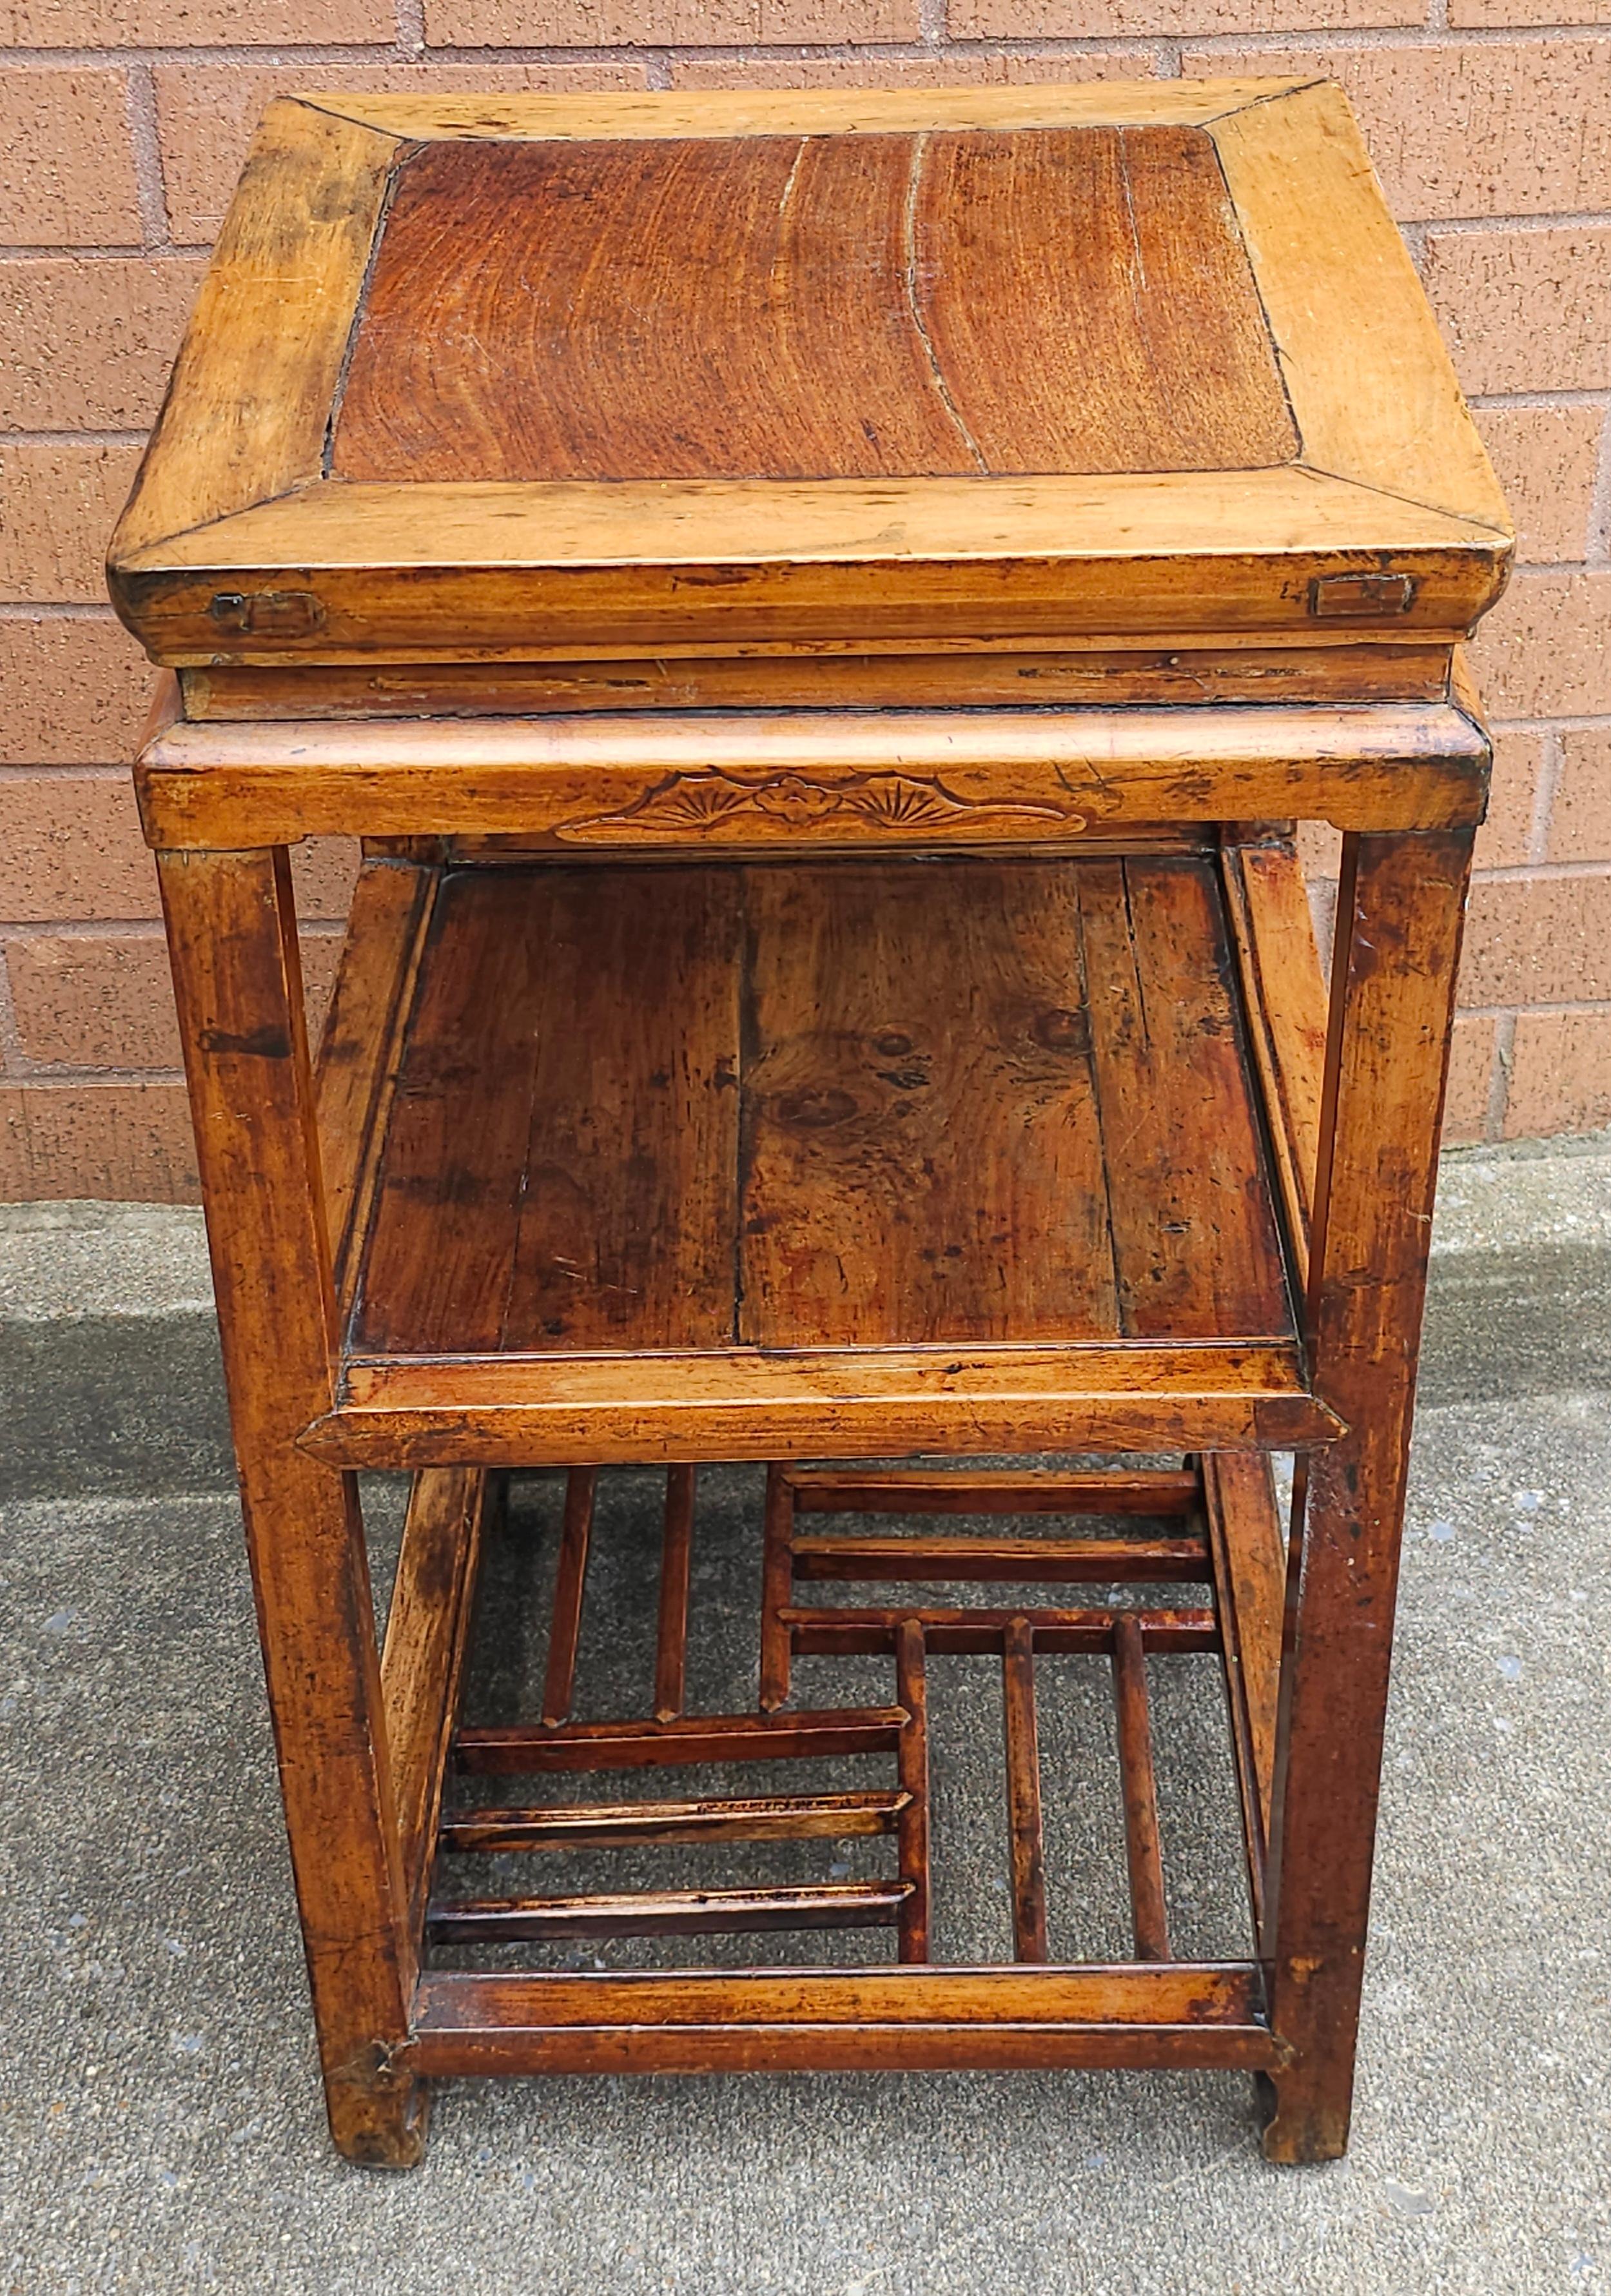 19th Centruy South East Asian, probably Chinese, Three-Tier Elmwood Side Table. Measures 15